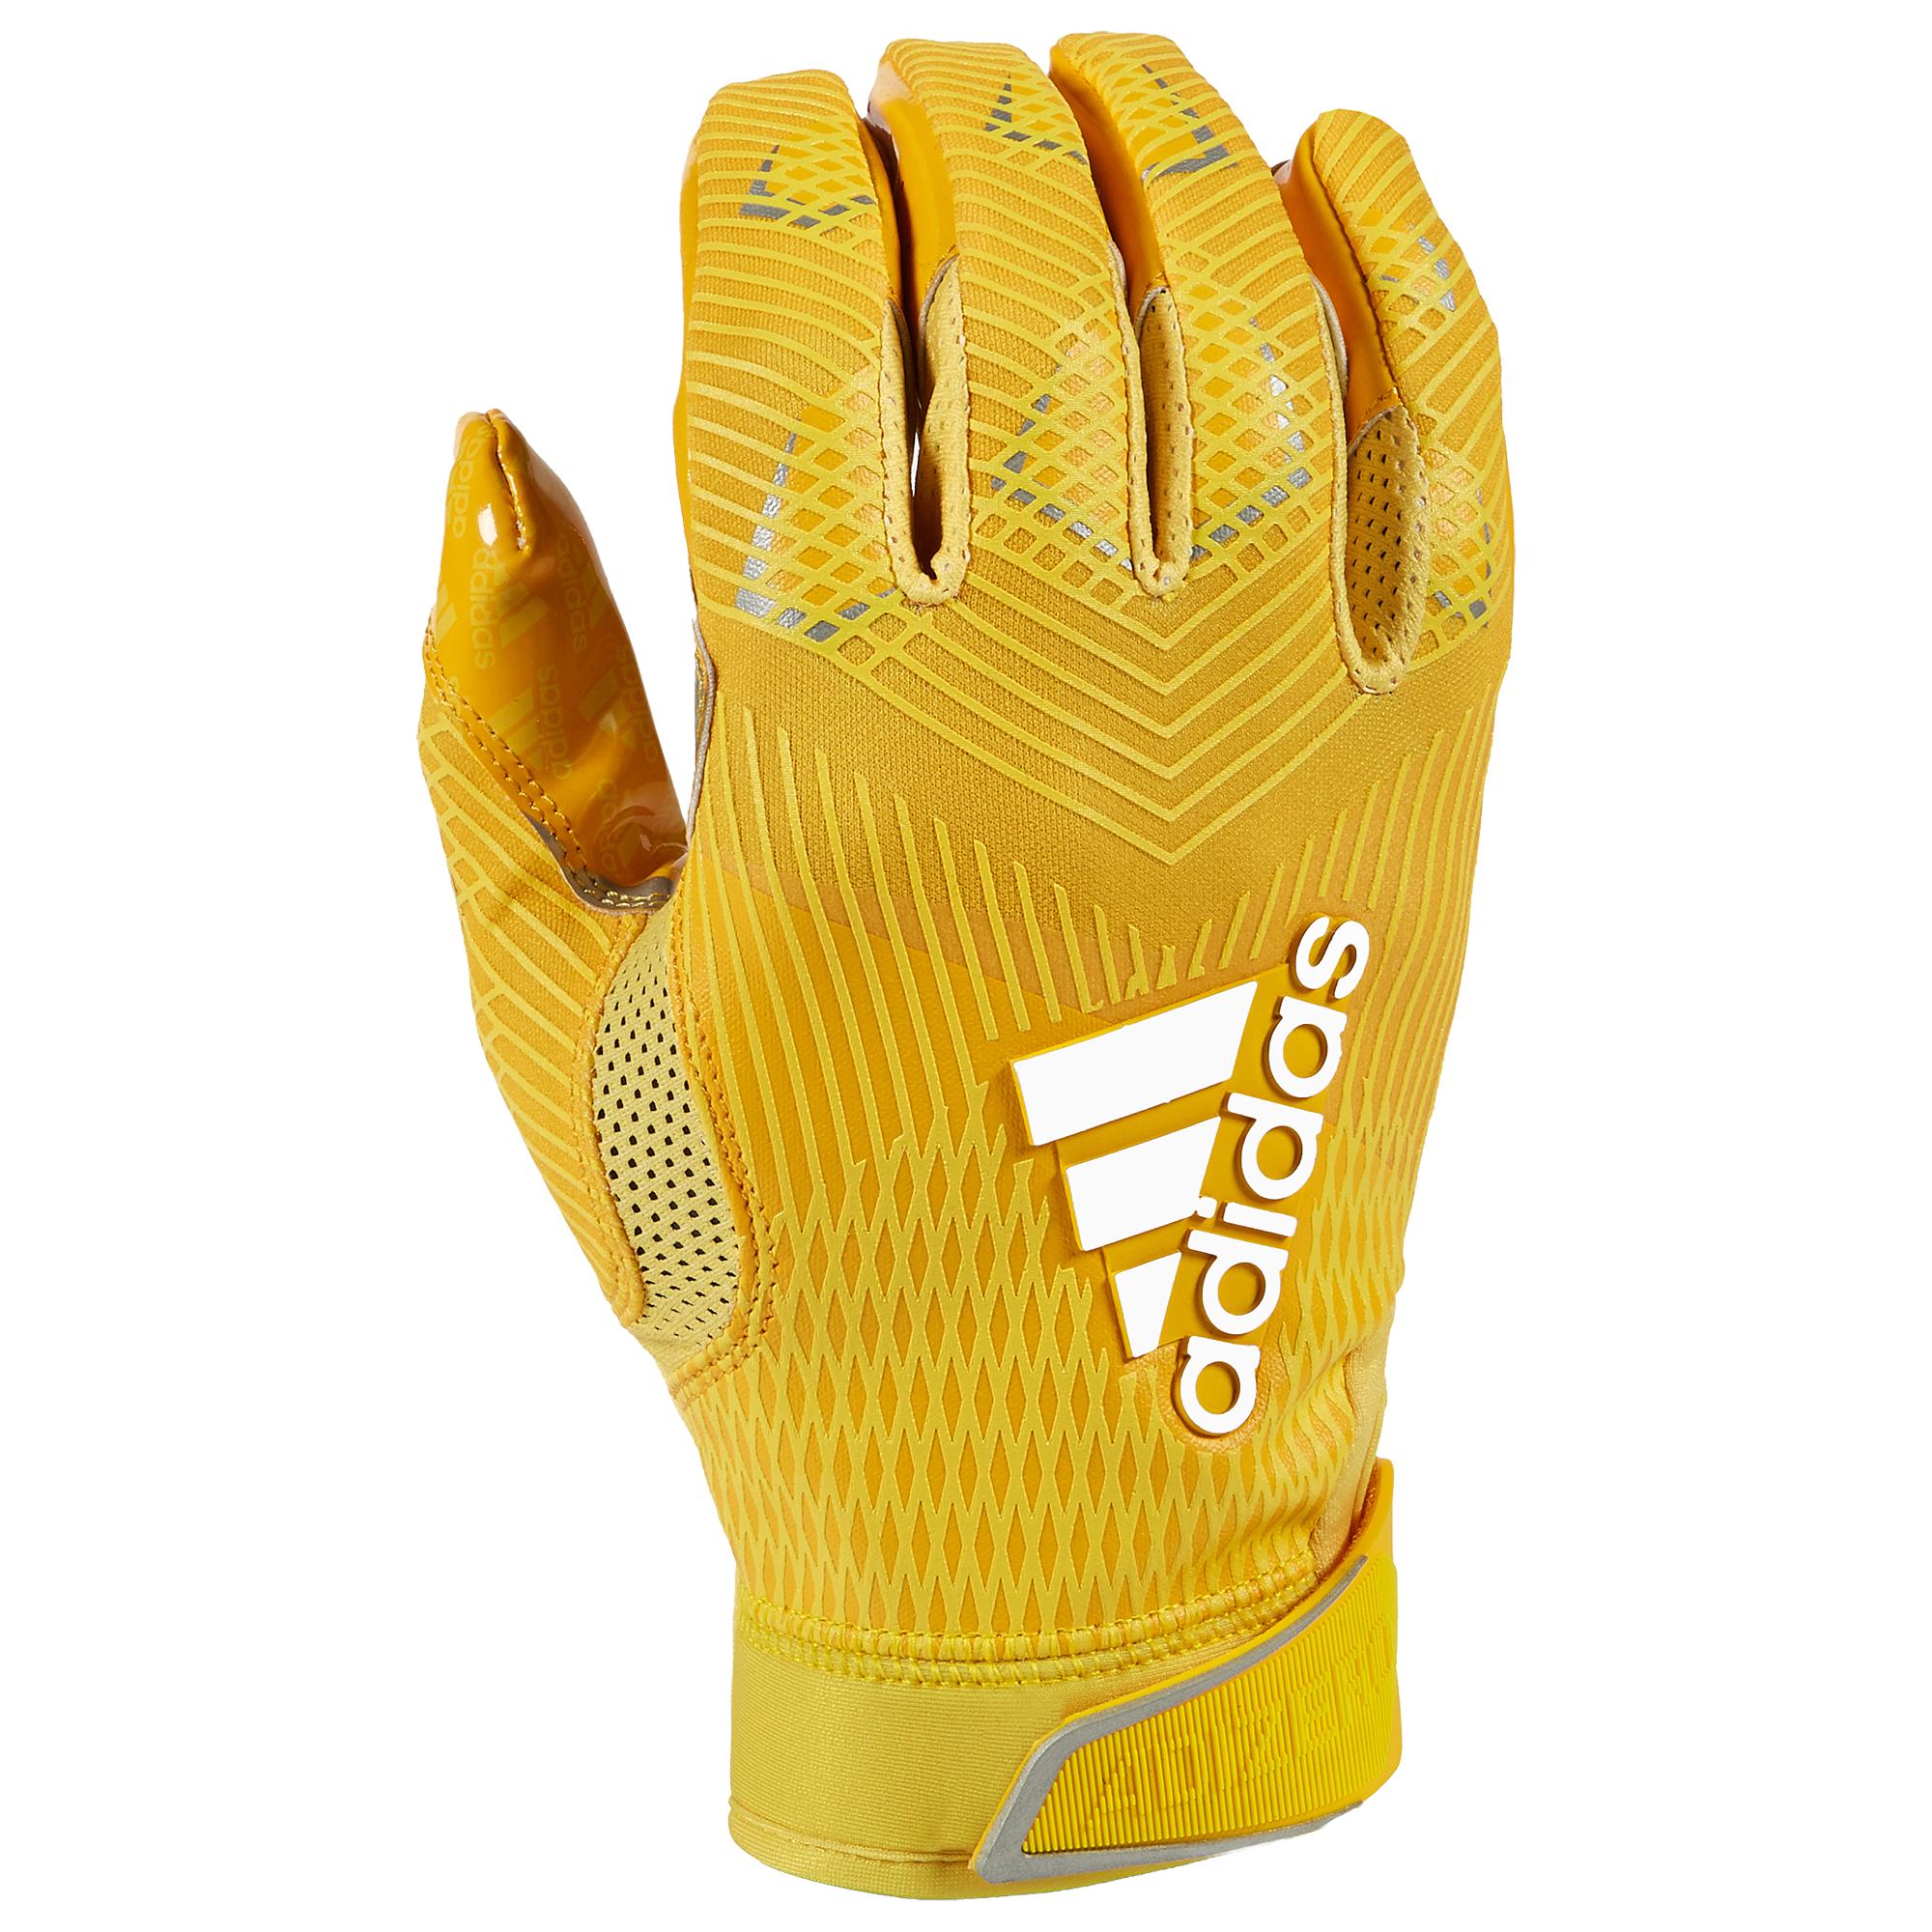 Adidas Football Gloves Yellow Hotsell, GET 58% OFF, www.clan-home.org